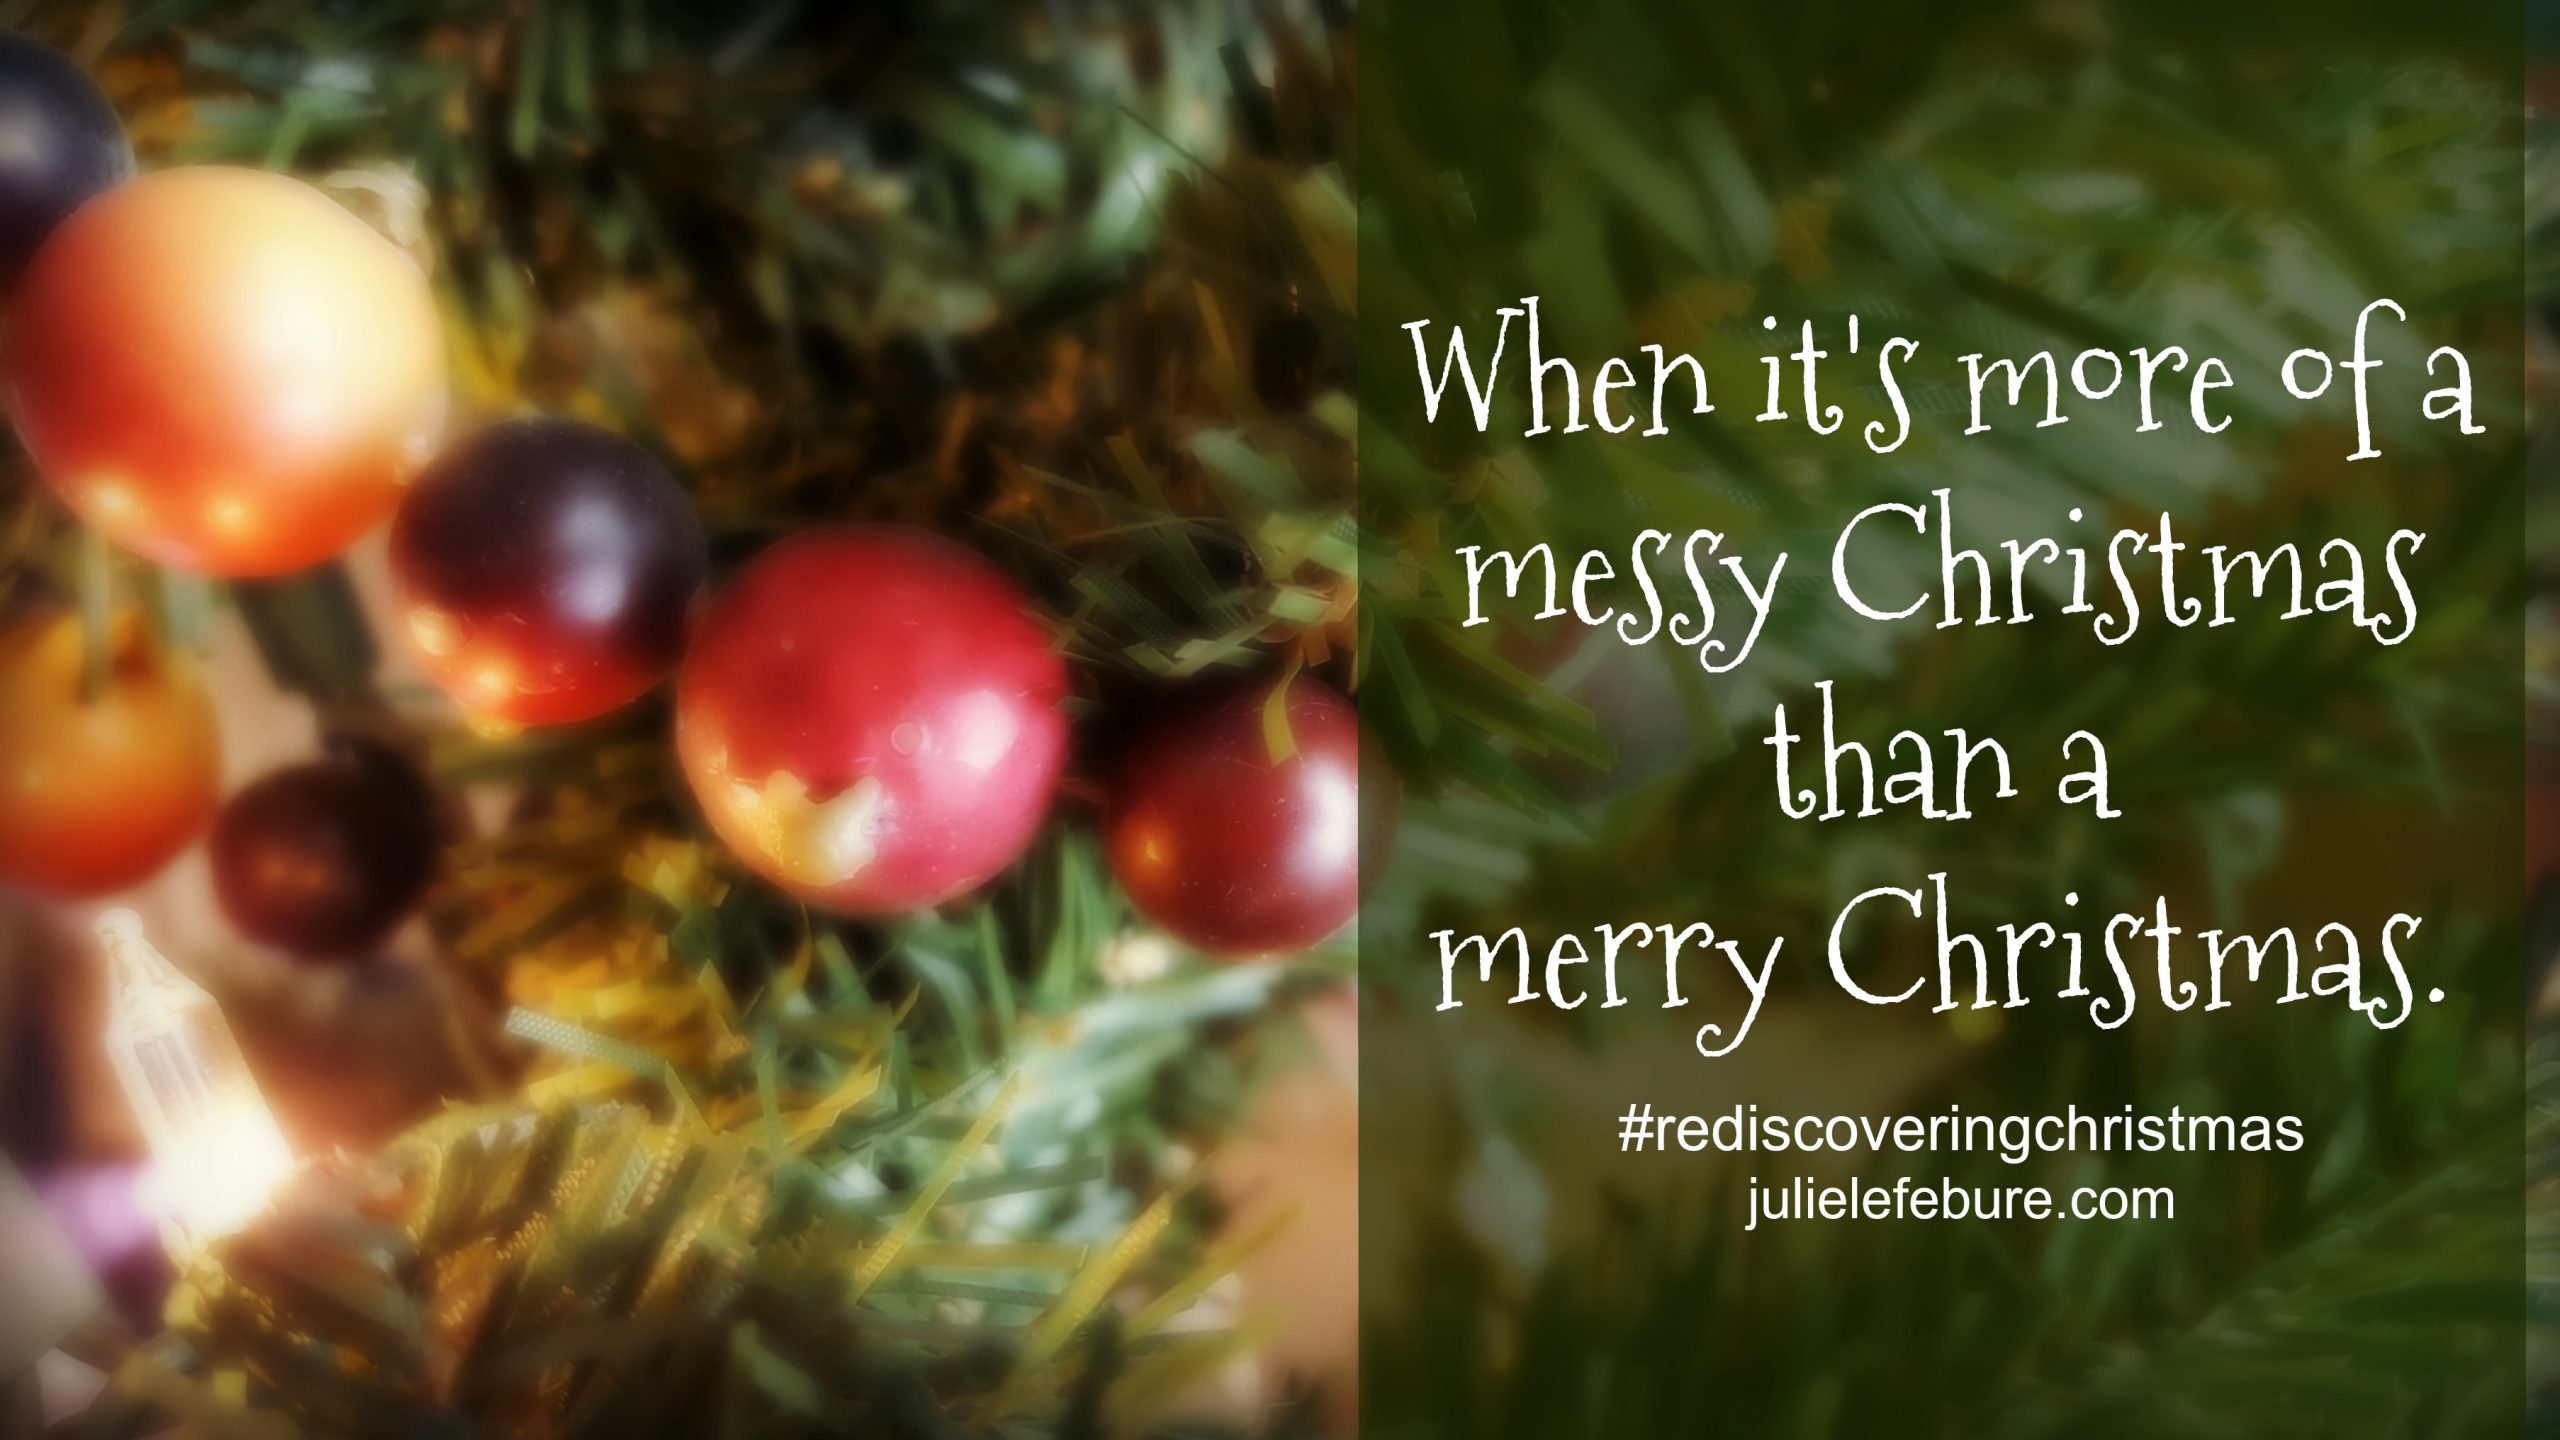 Rediscovering Christmas – When It’s A Messy Christmas